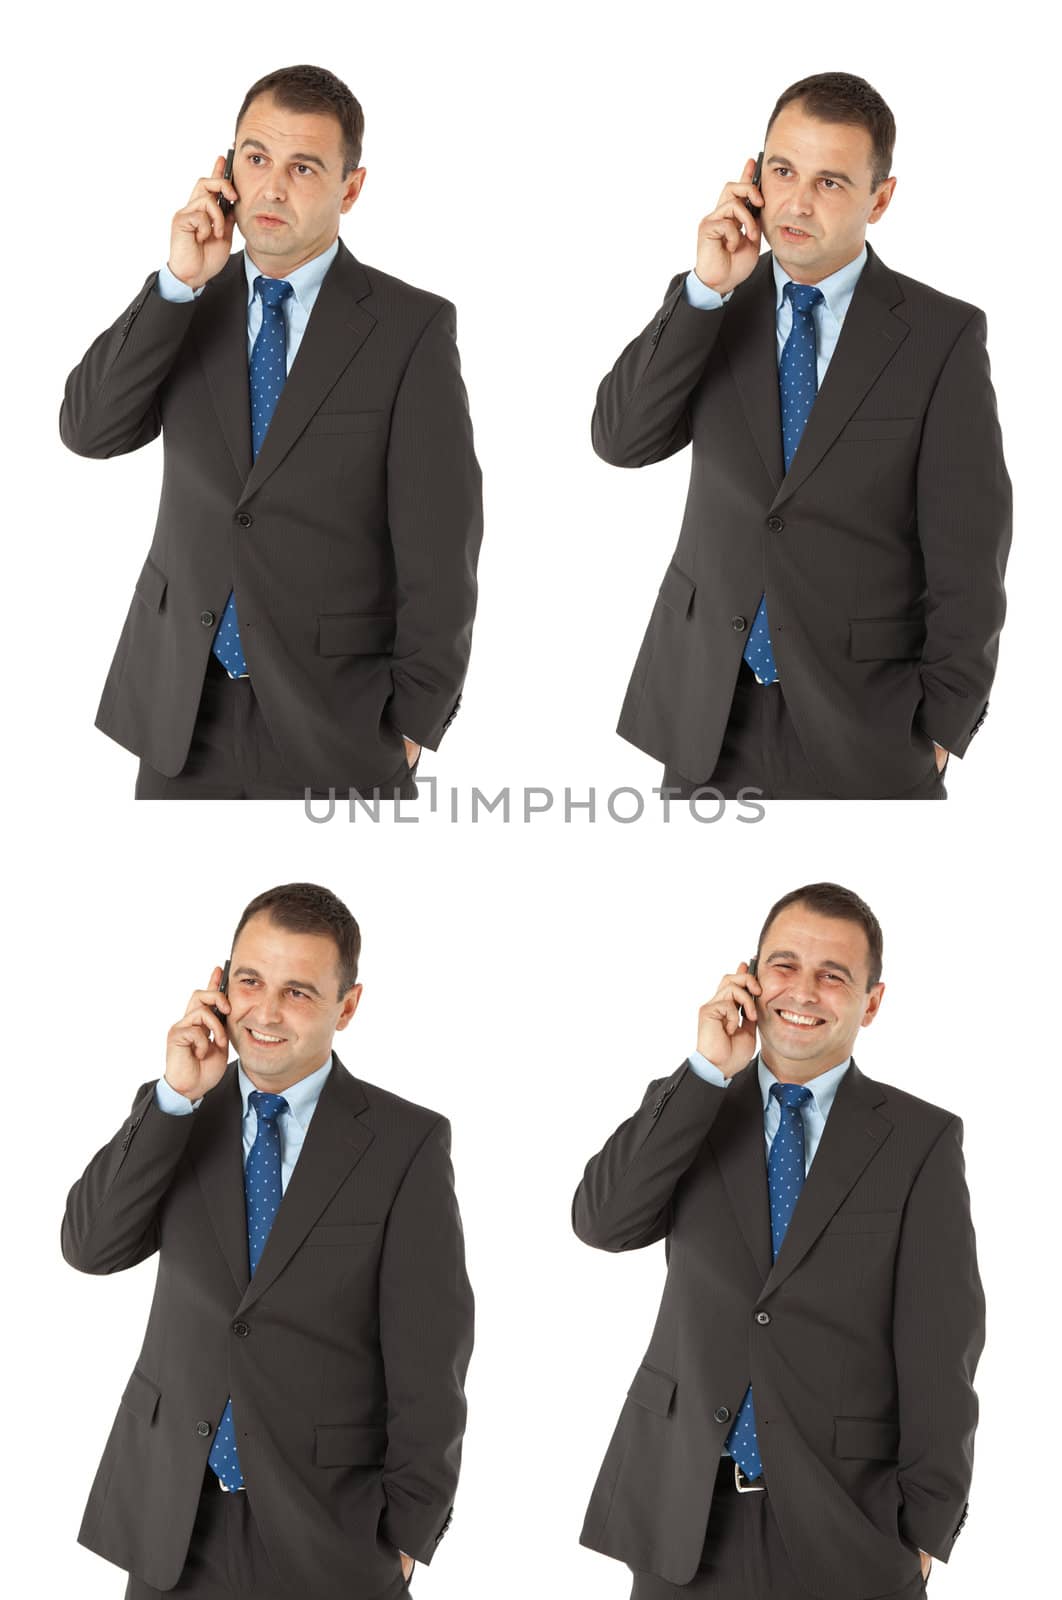 Multiple expressions of businessman standing and talking on the phone